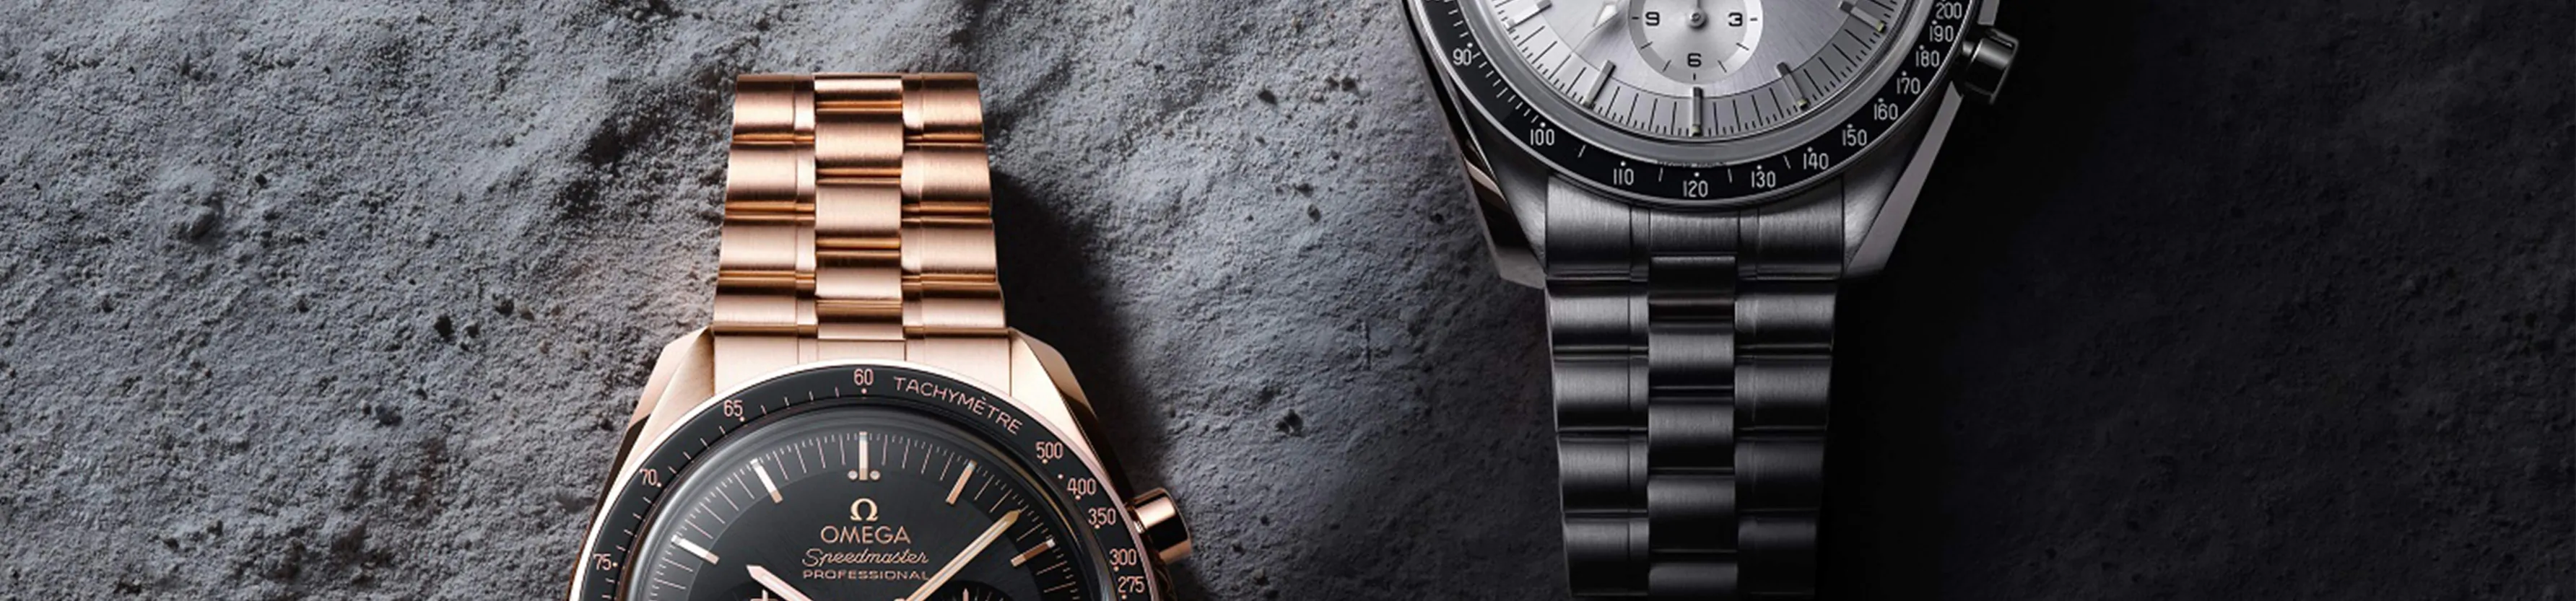 OMEGA Speedmaster Moonwatch: The Legacy Continues